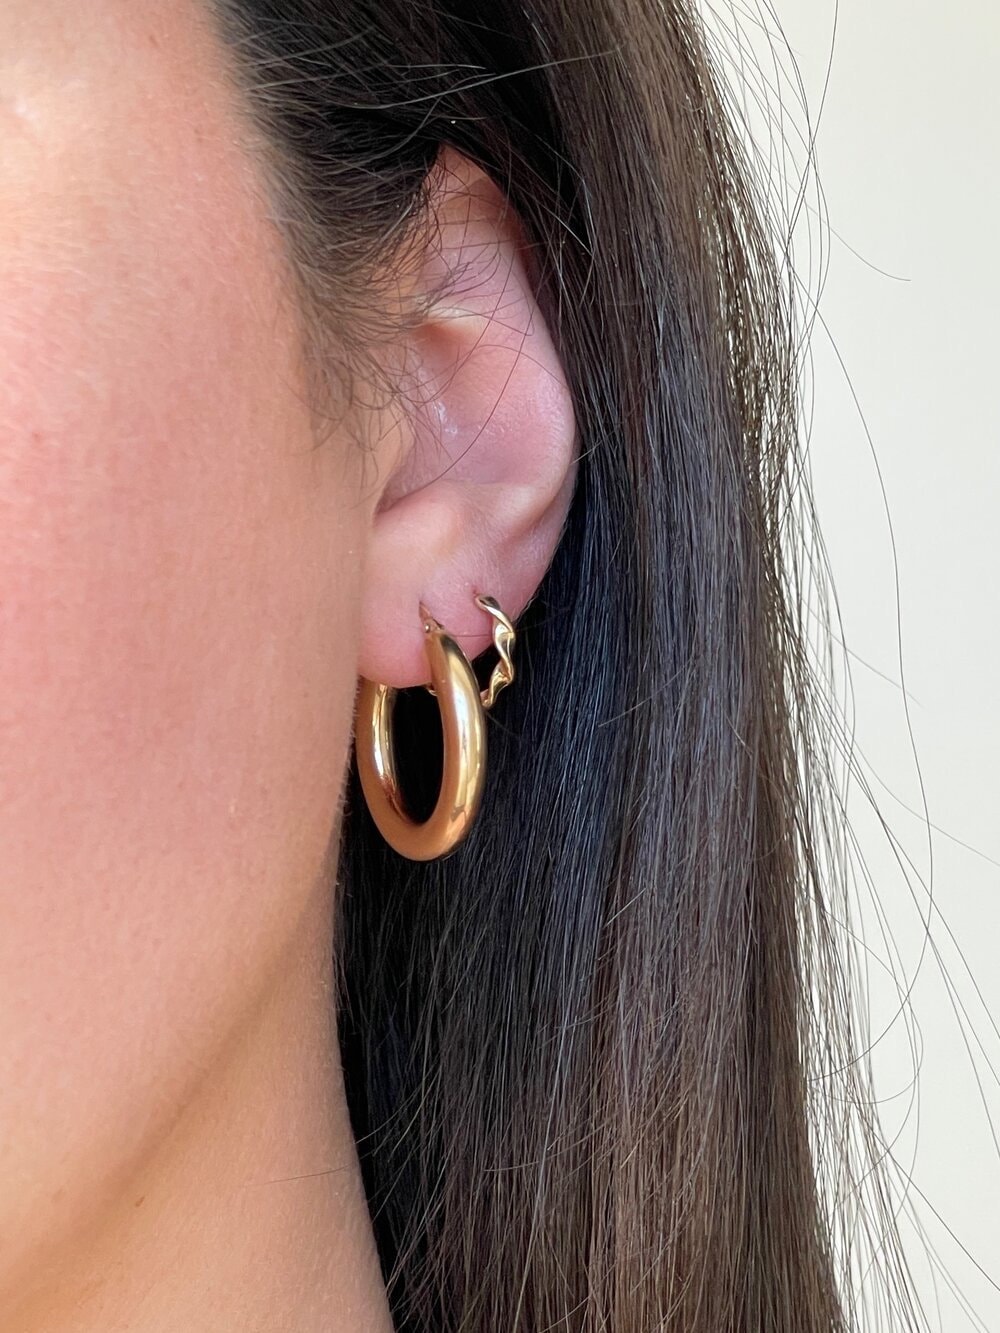 Buy 3mm Thick Gold Hoops Online In India - Etsy India